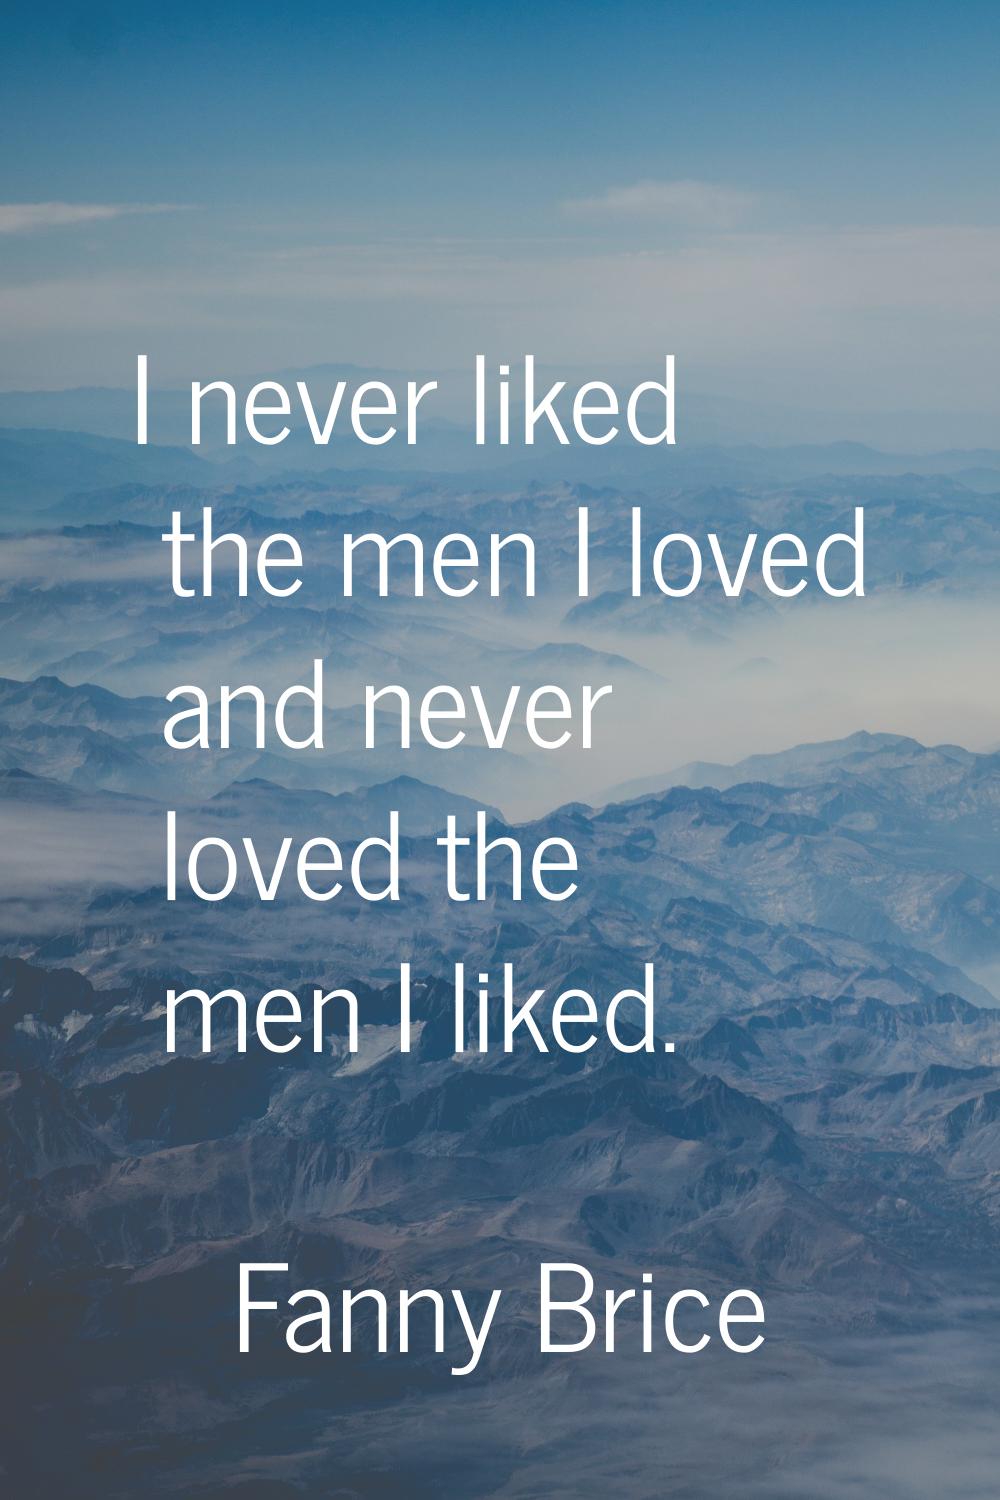 I never liked the men I loved and never loved the men I liked.